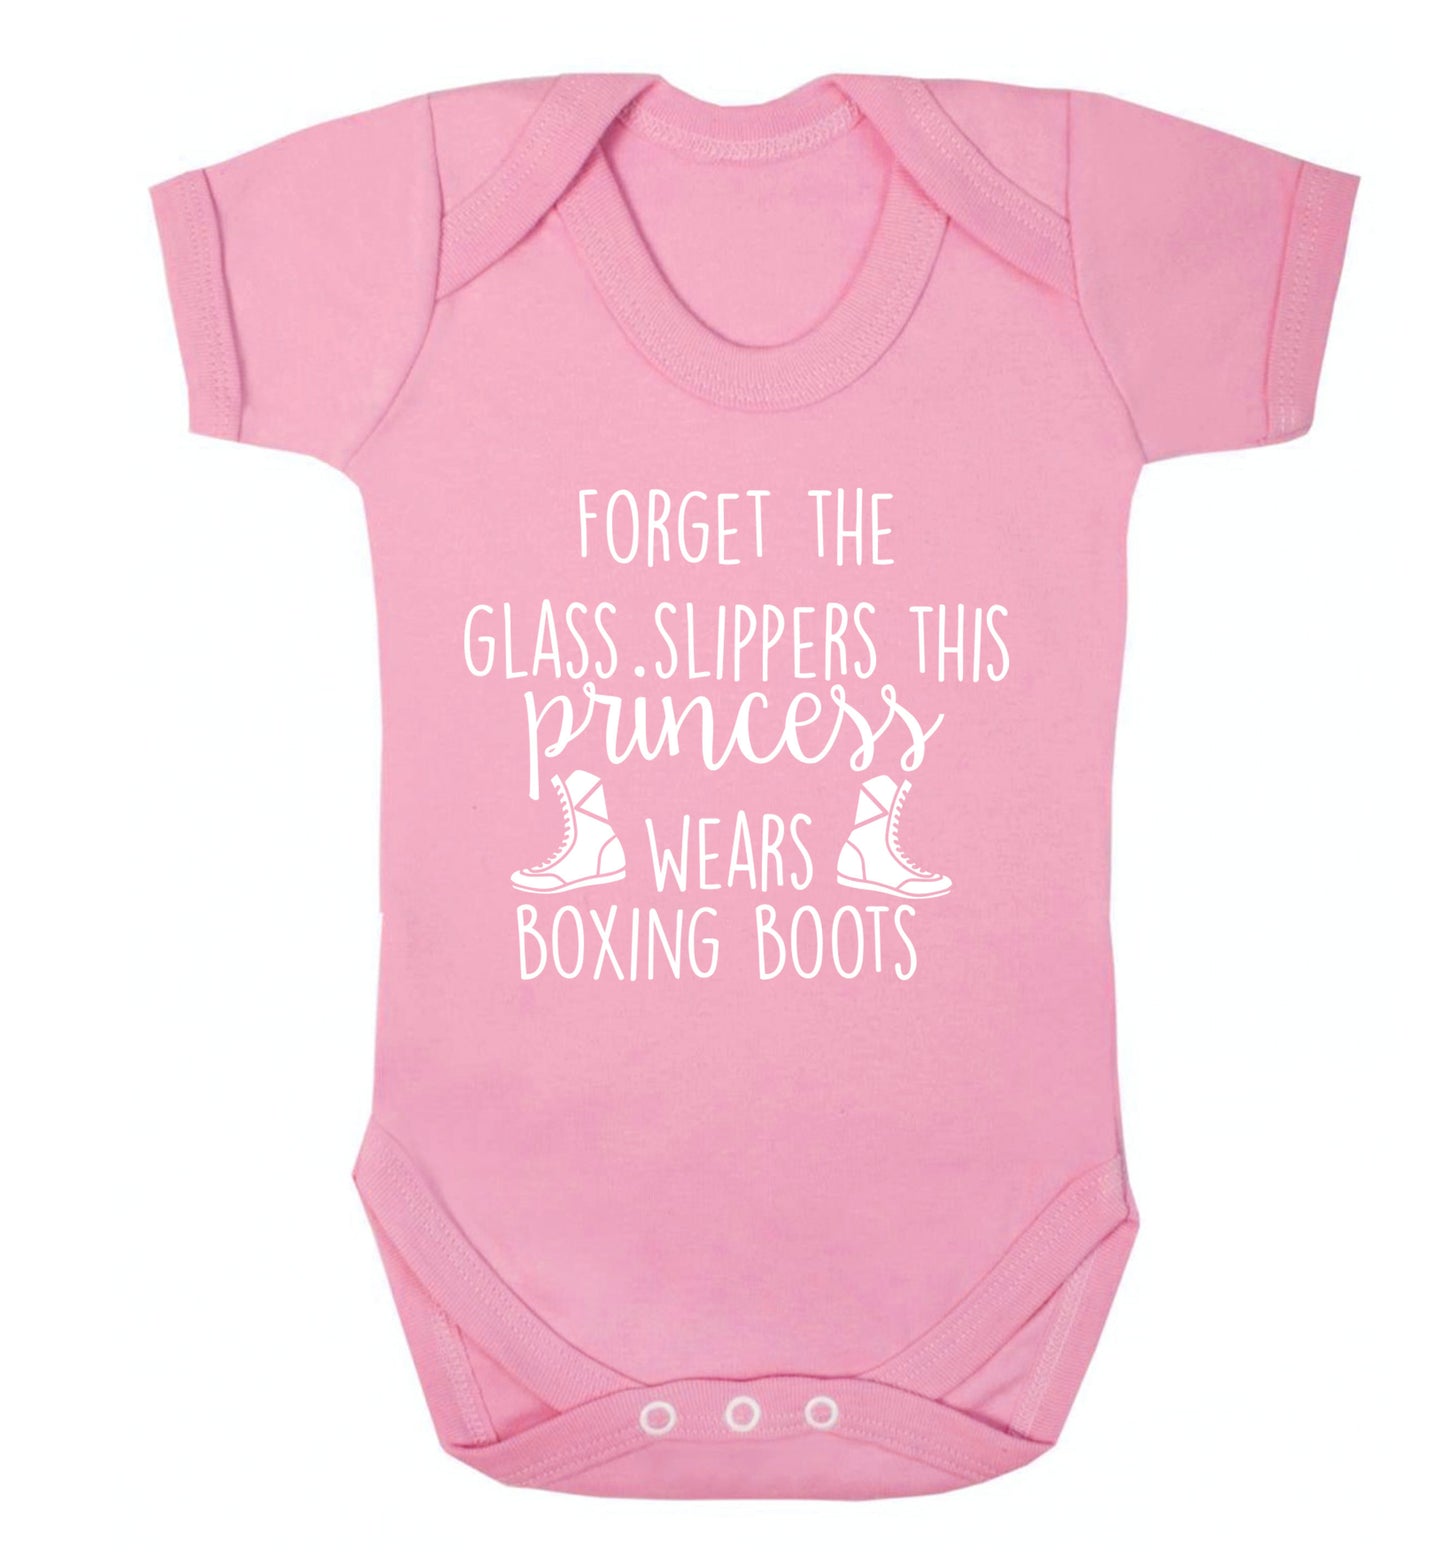 Forget the glass slippers this princess wears boxing boots Baby Vest pale pink 18-24 months